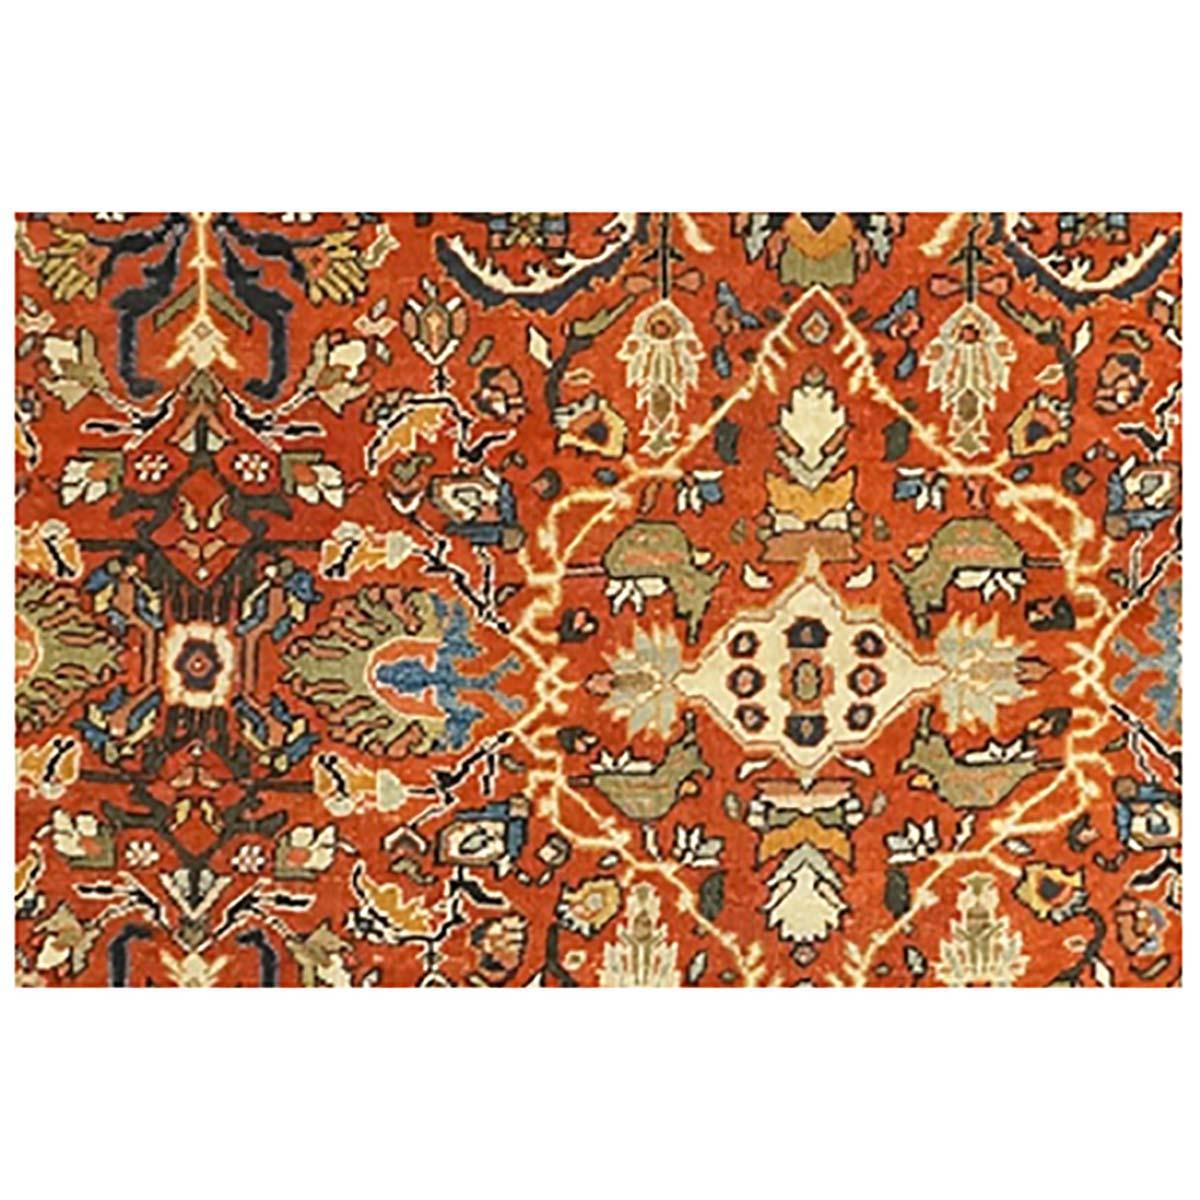 Ashly Fine rugs presents an exquisite 1910 Antique Persian Sultanabad 10x12 Red Handmade Rug. Founded in 1808, the city of Sultanabad has become one of the most important carpet production cities in Iran. Persian Sultanabads are perhaps the most